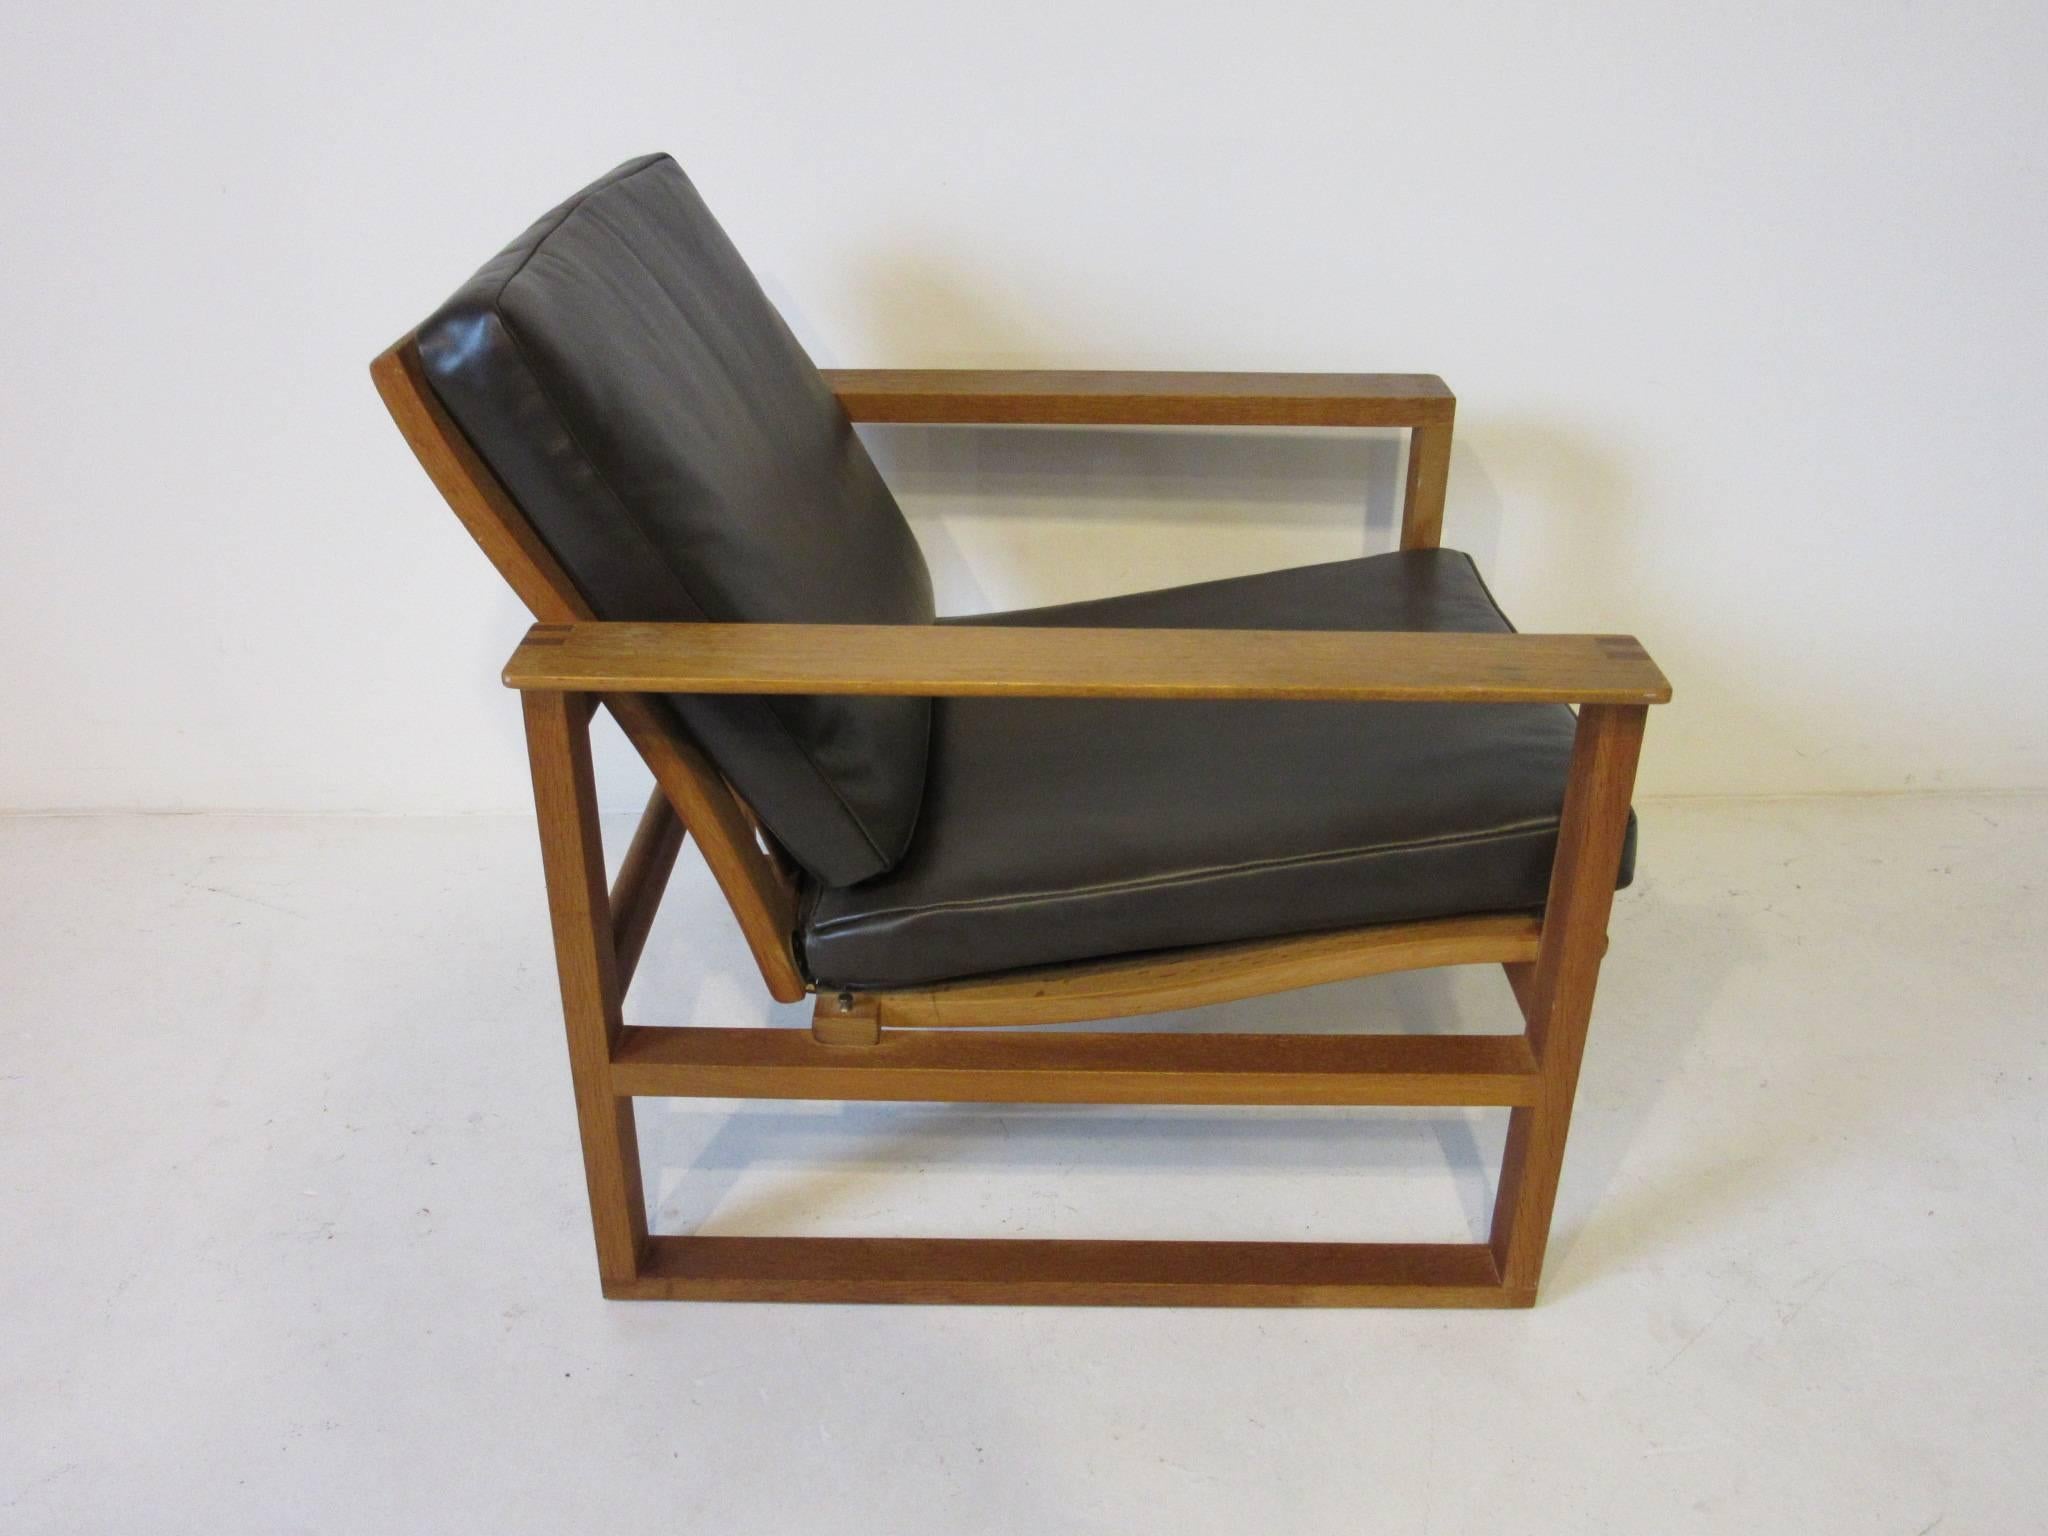 A Mogensen wood framed sled lounge chair with rich and smooth dark brown toned leather cushions. Retains the manufactures tag- model # 2256 serial # 675/ Aktieselskabet Denmark - Fredericia Stolefabrik.